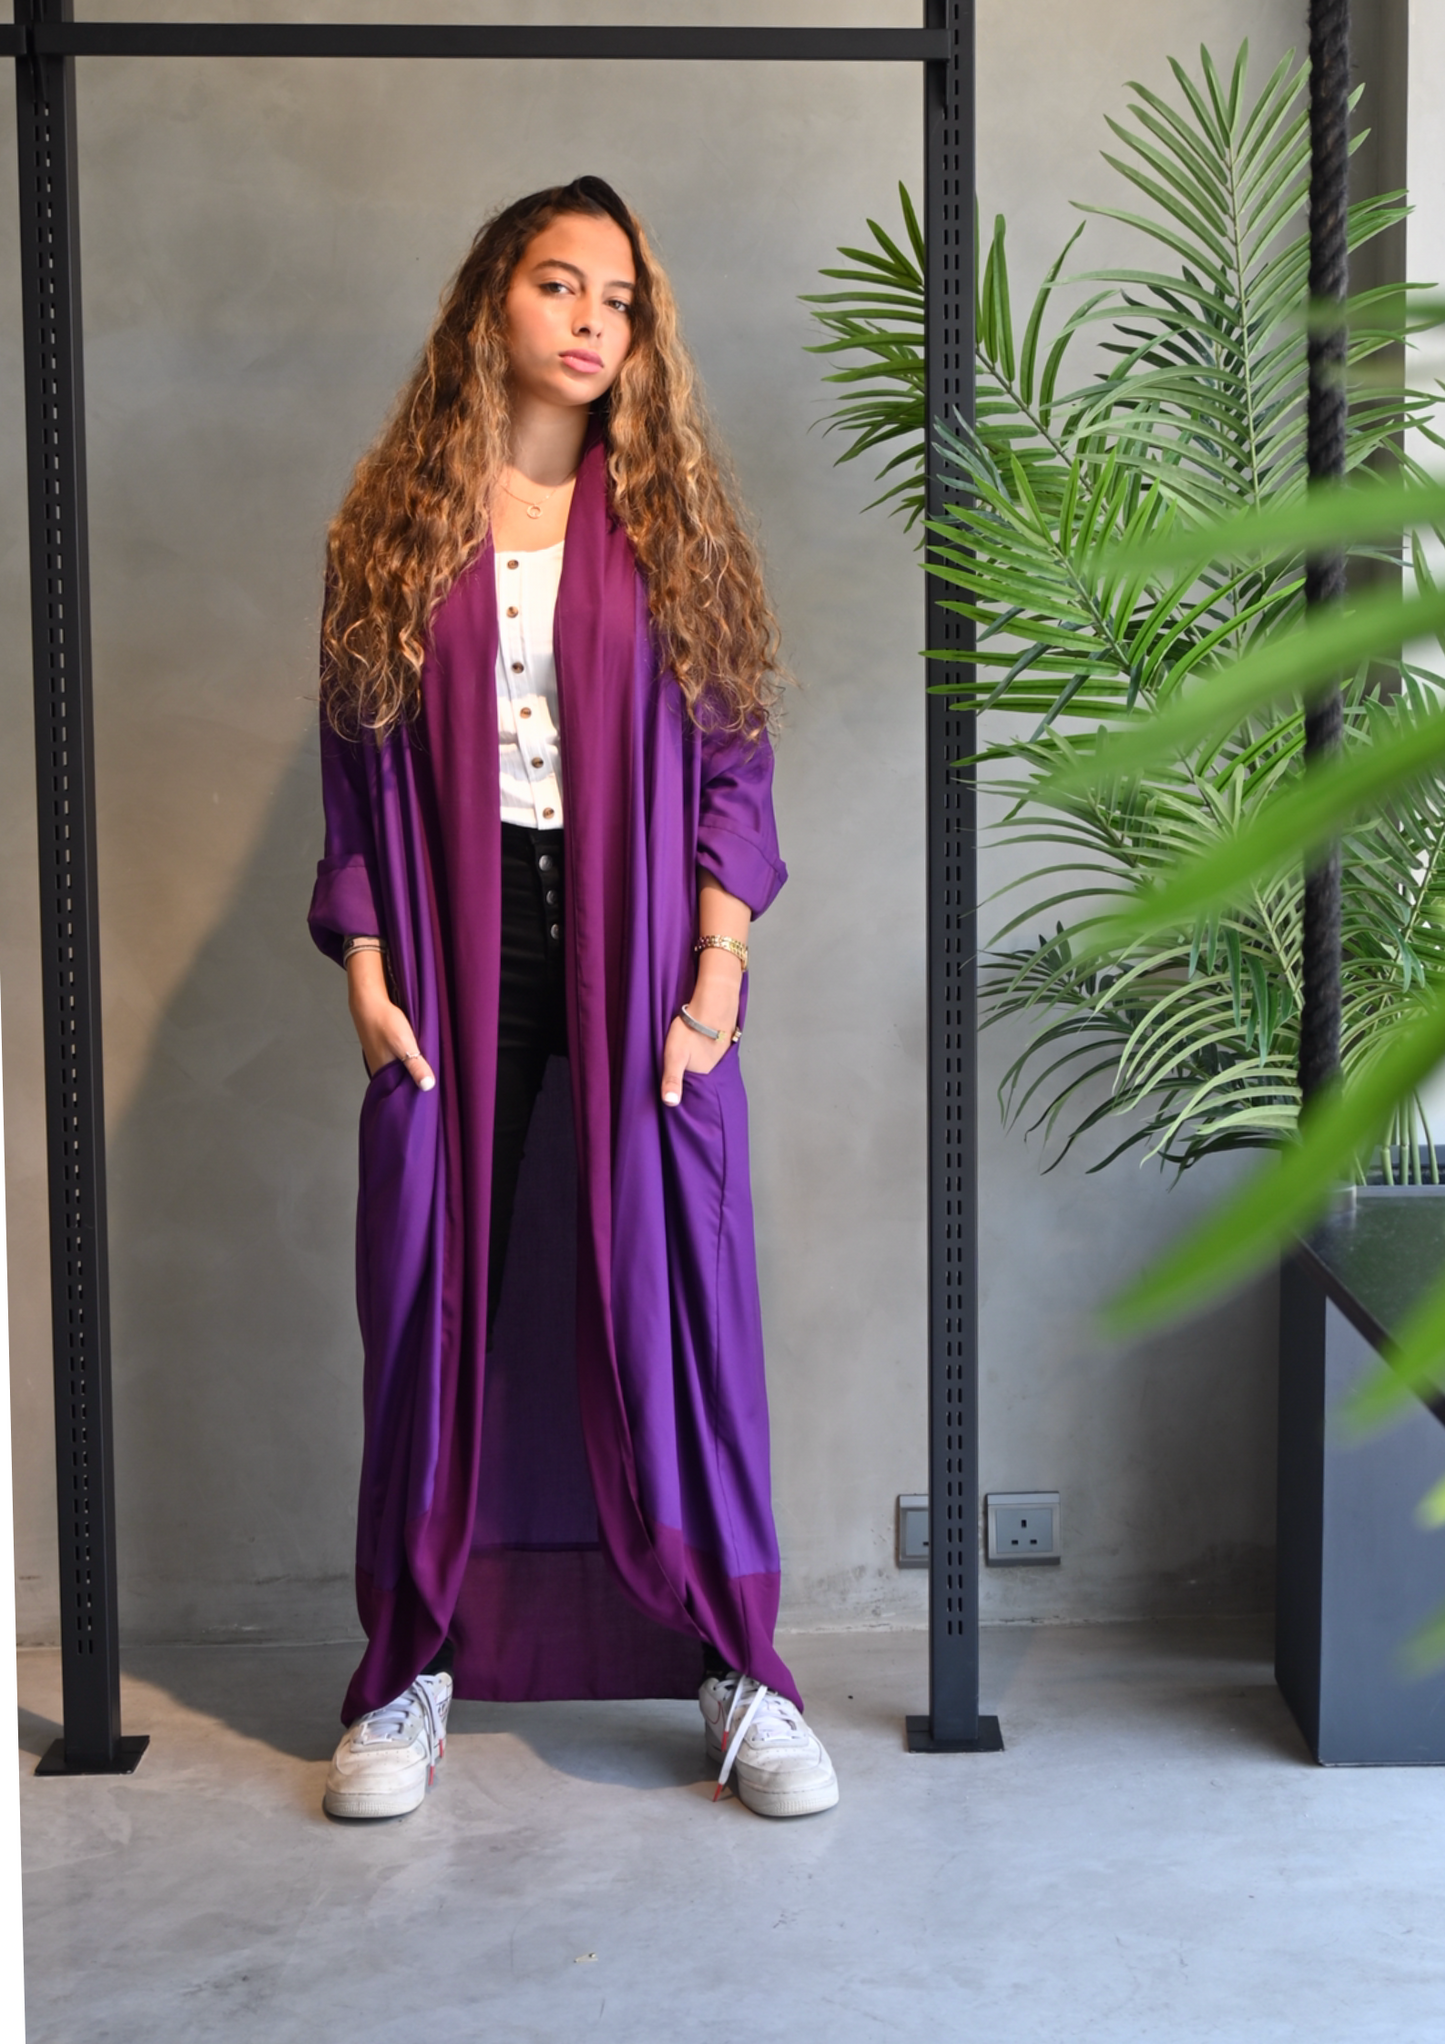 The Summertime Abaya Hijab - Lightweight for hot days - The Untitled Project